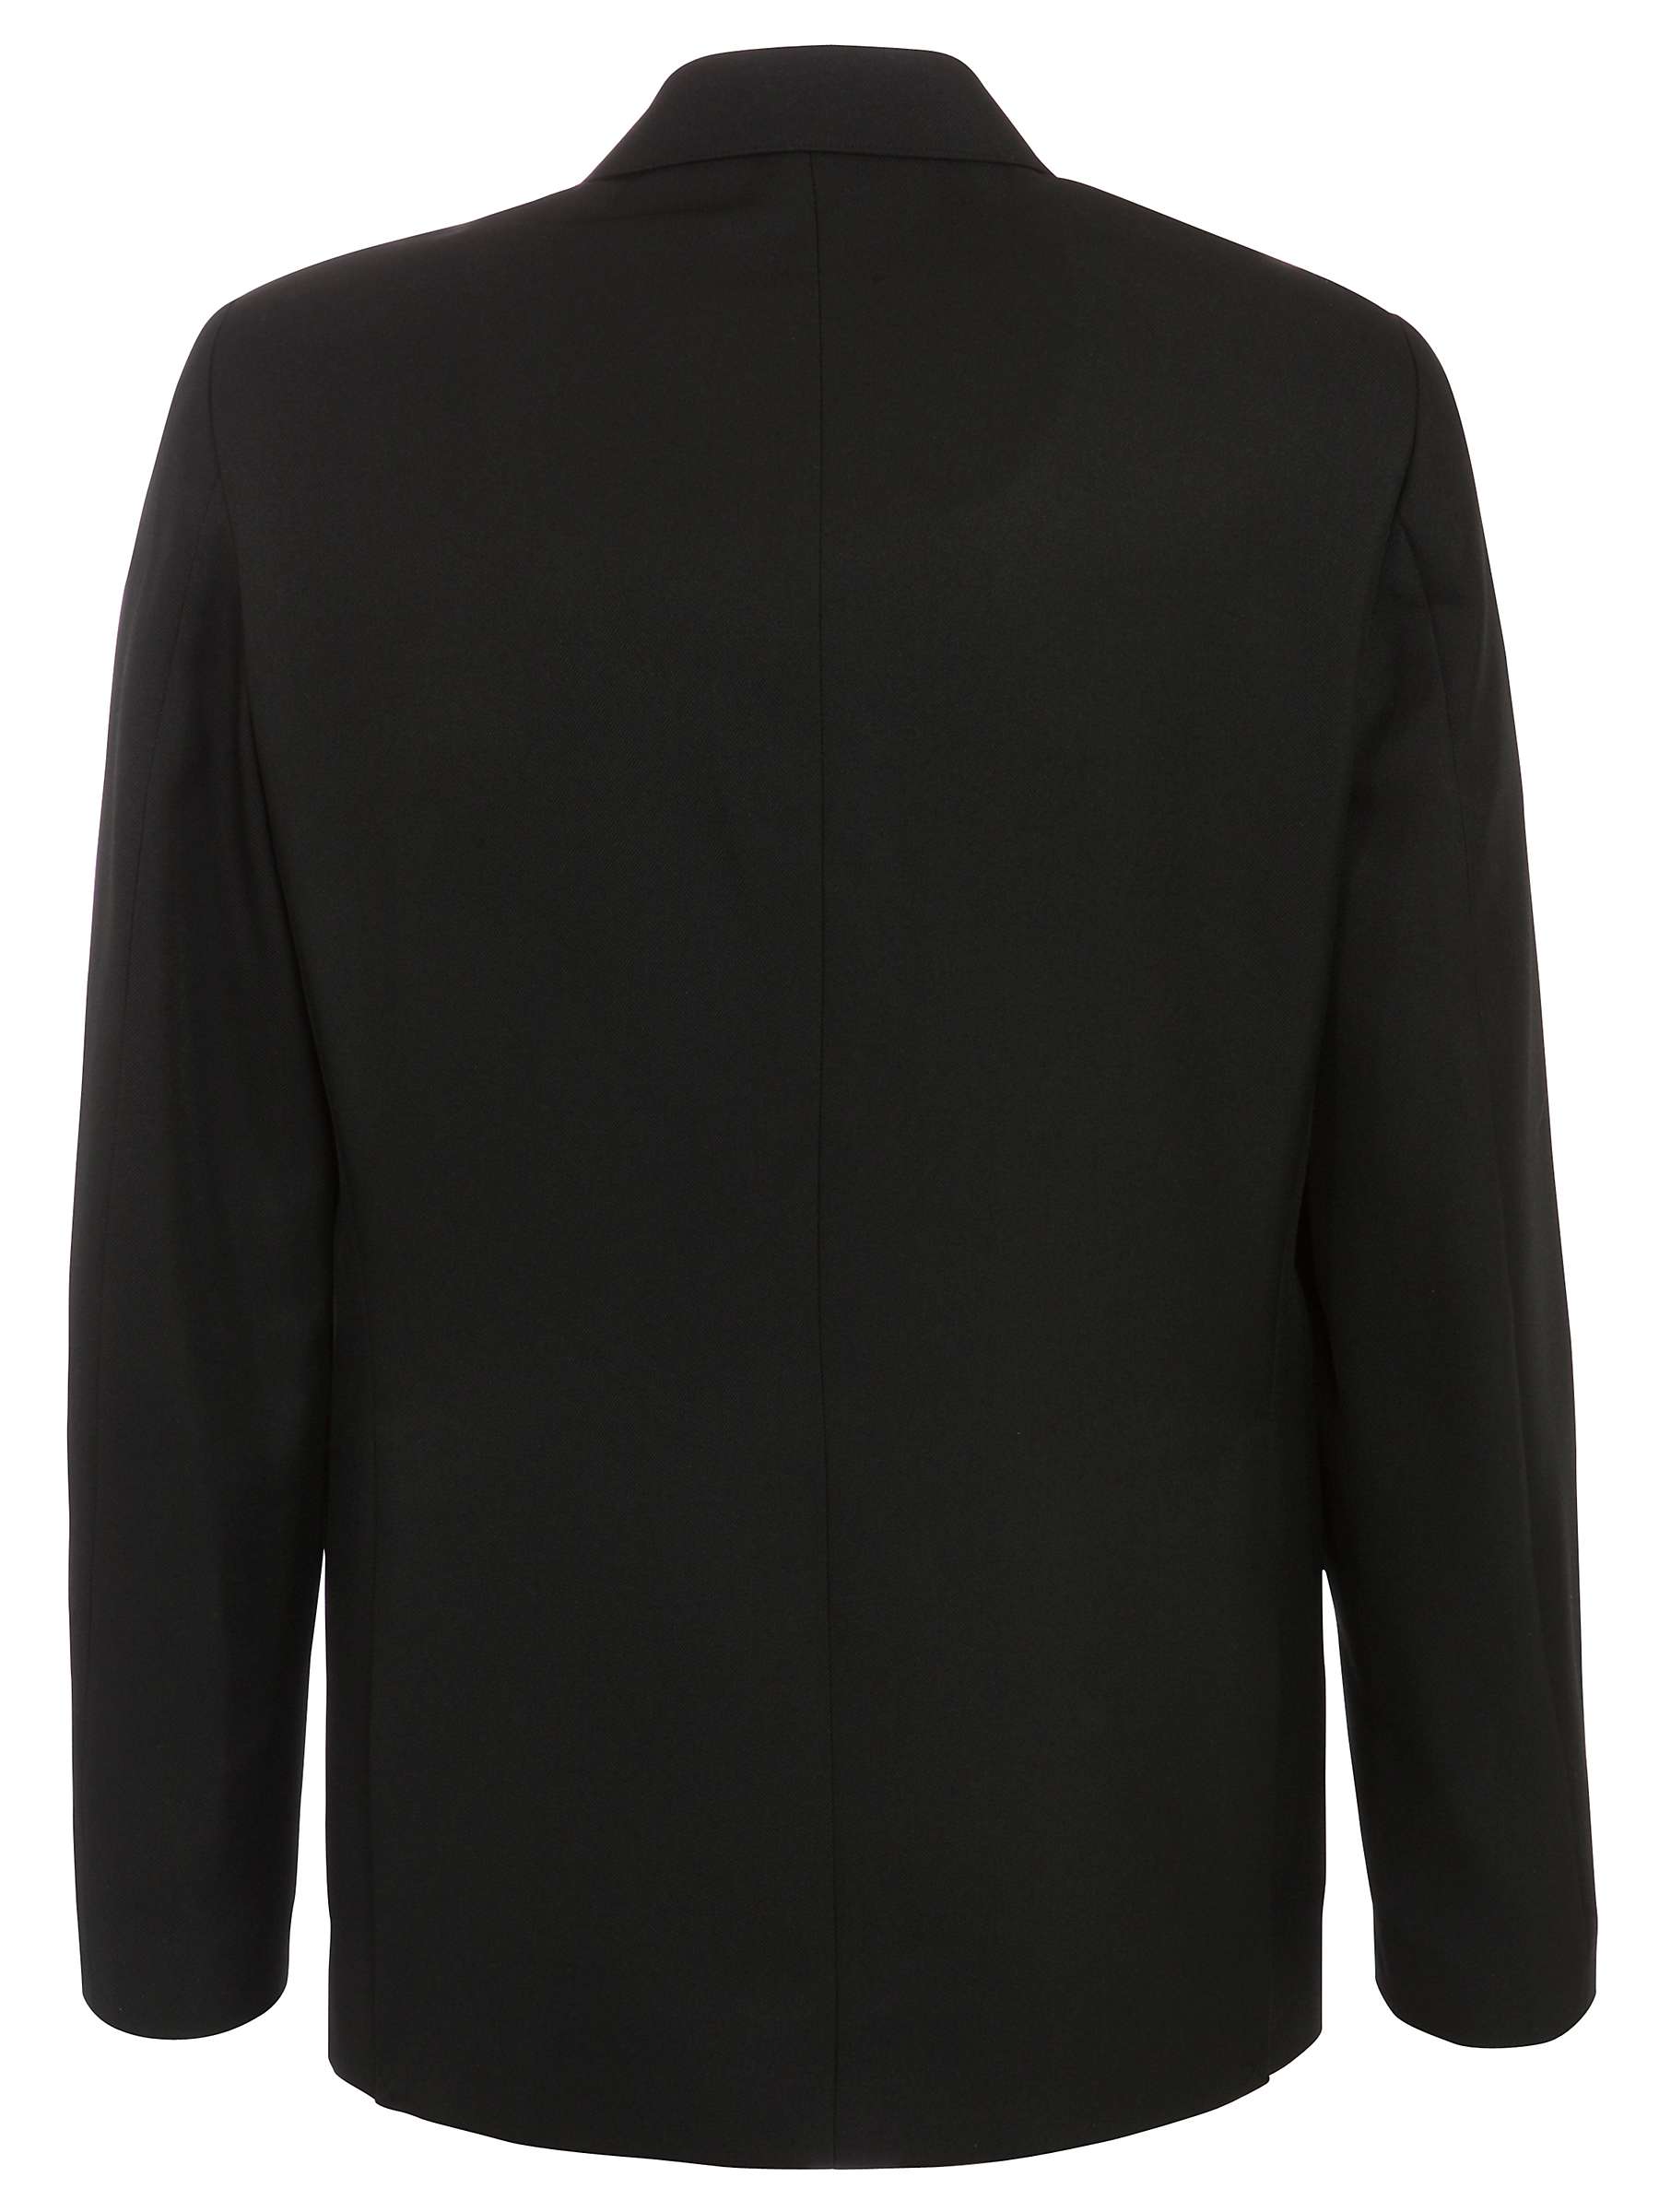 Buy The South Wolds Academy & Sixth Form Boys' Blazer, Black Online at johnlewis.com